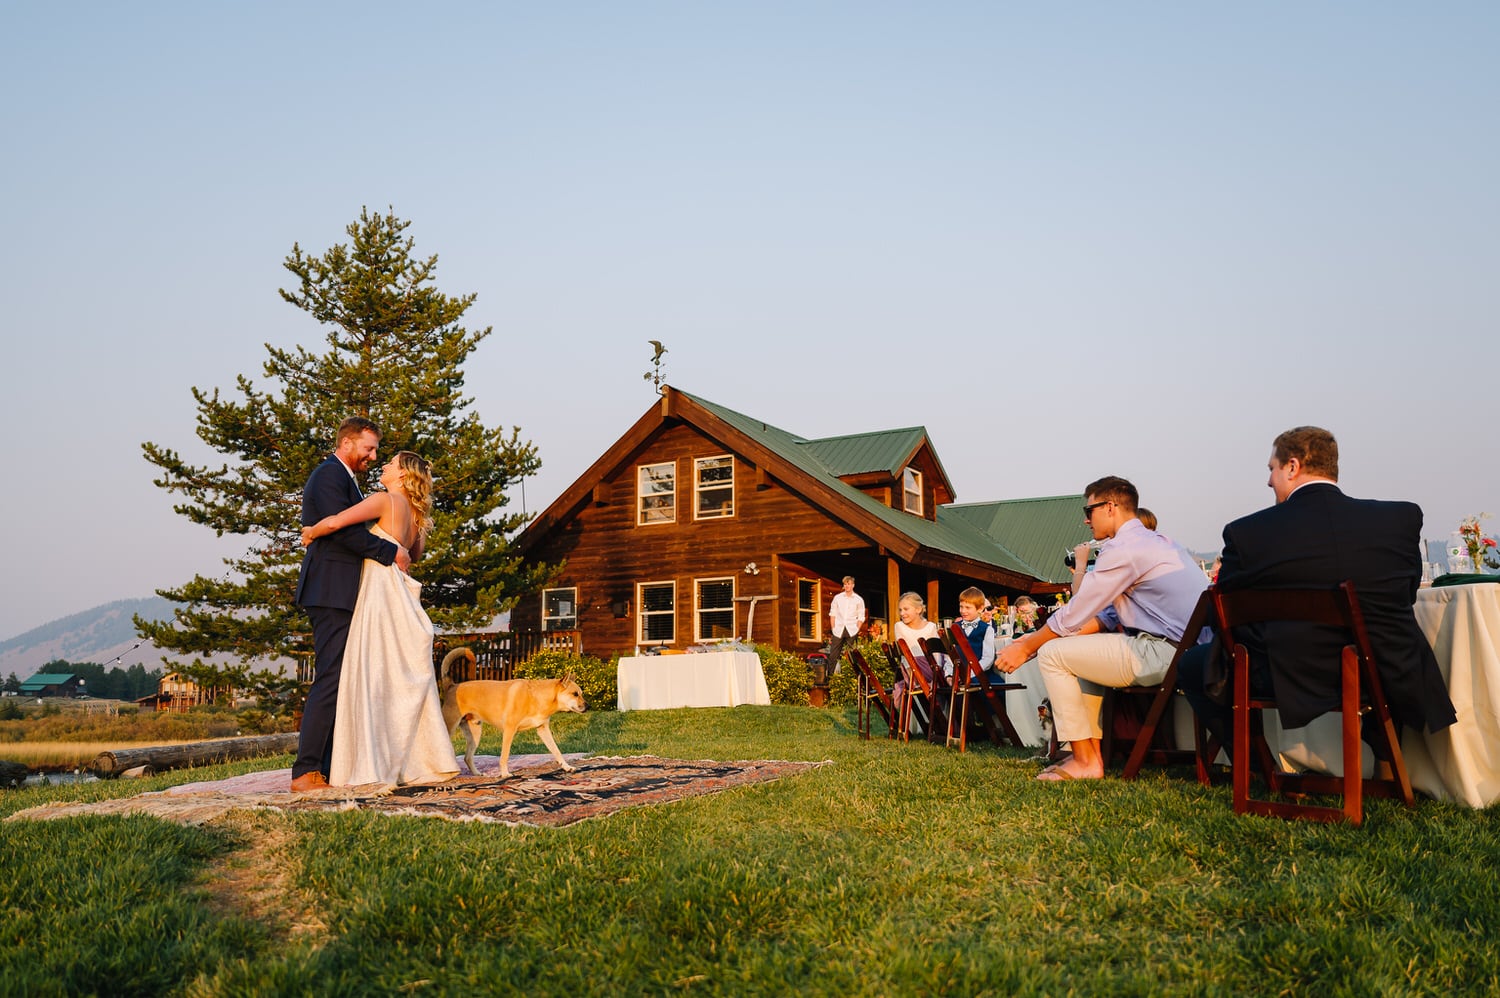 A wedding couple shares their first dance in front of a Airbnb cabin in Stanley, Idaho. There are wedding guests sitting along a table watching the couple dance.